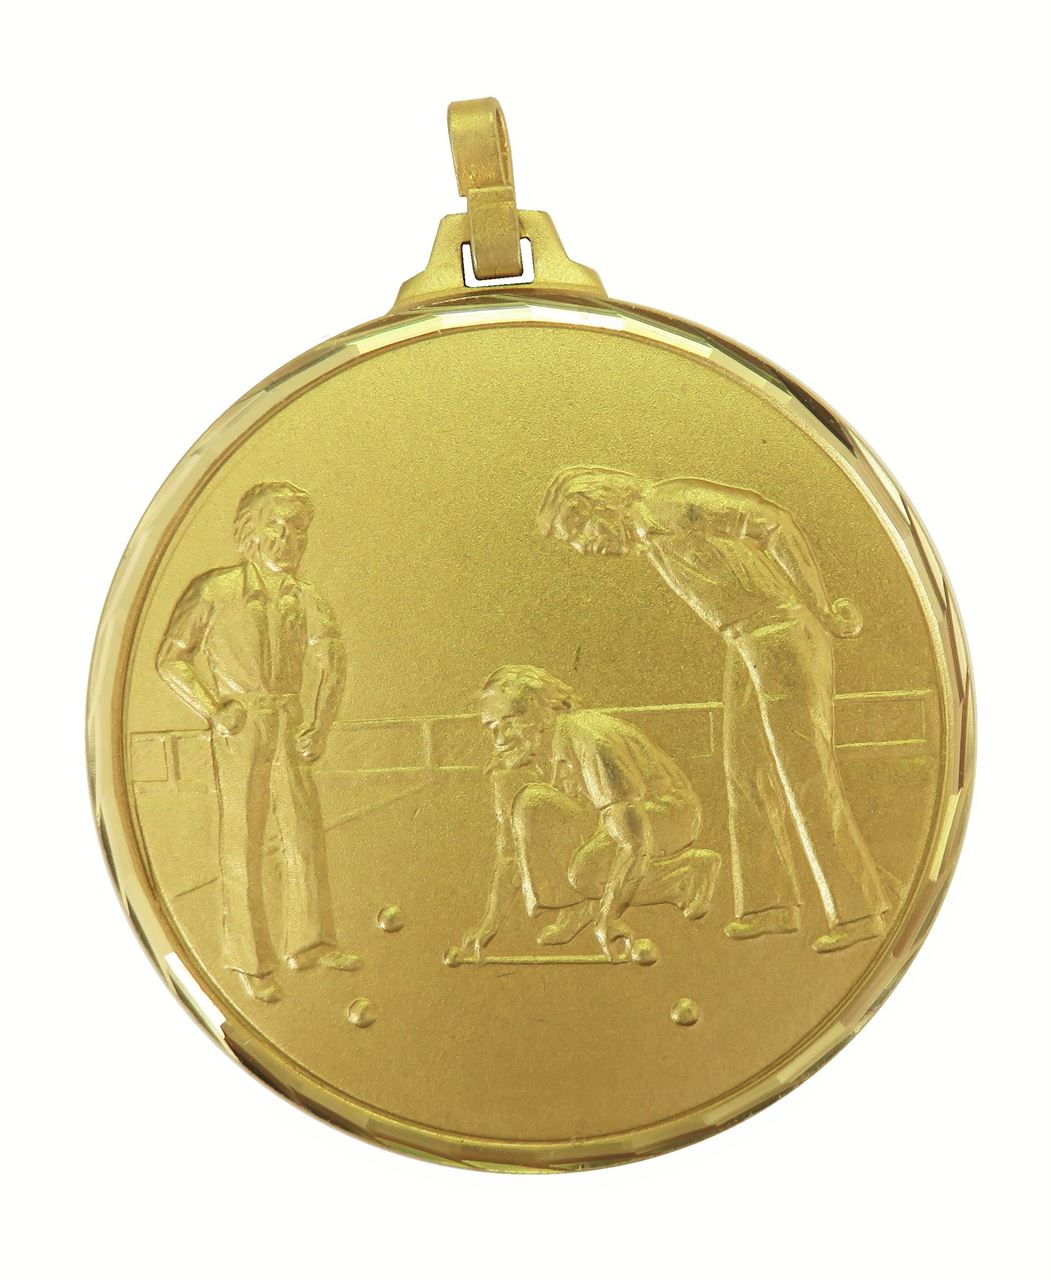 Gold Faceted Lawn Bowls Medal (size: 52mm) - 151F